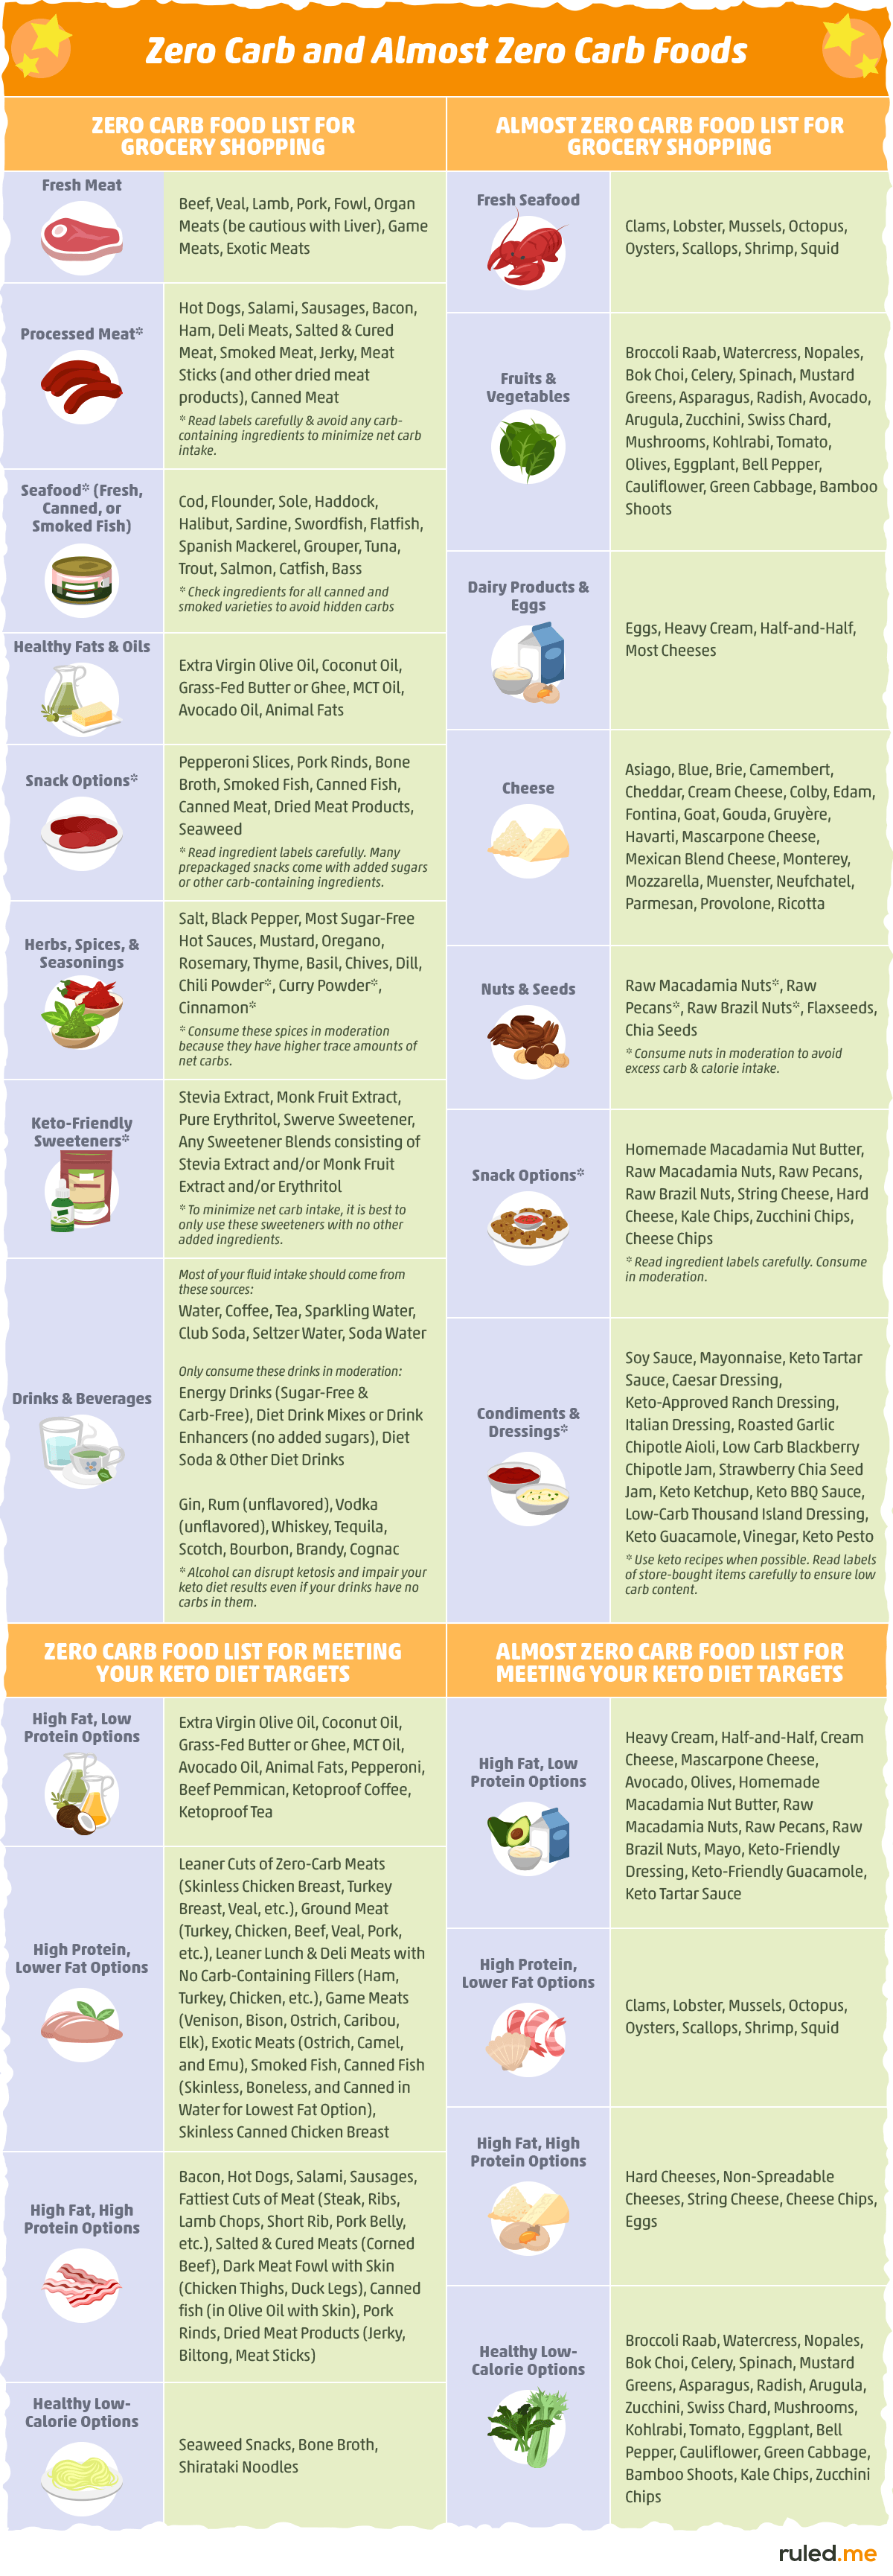 All Zero Carb and Almost Zero Carb Foods on One List